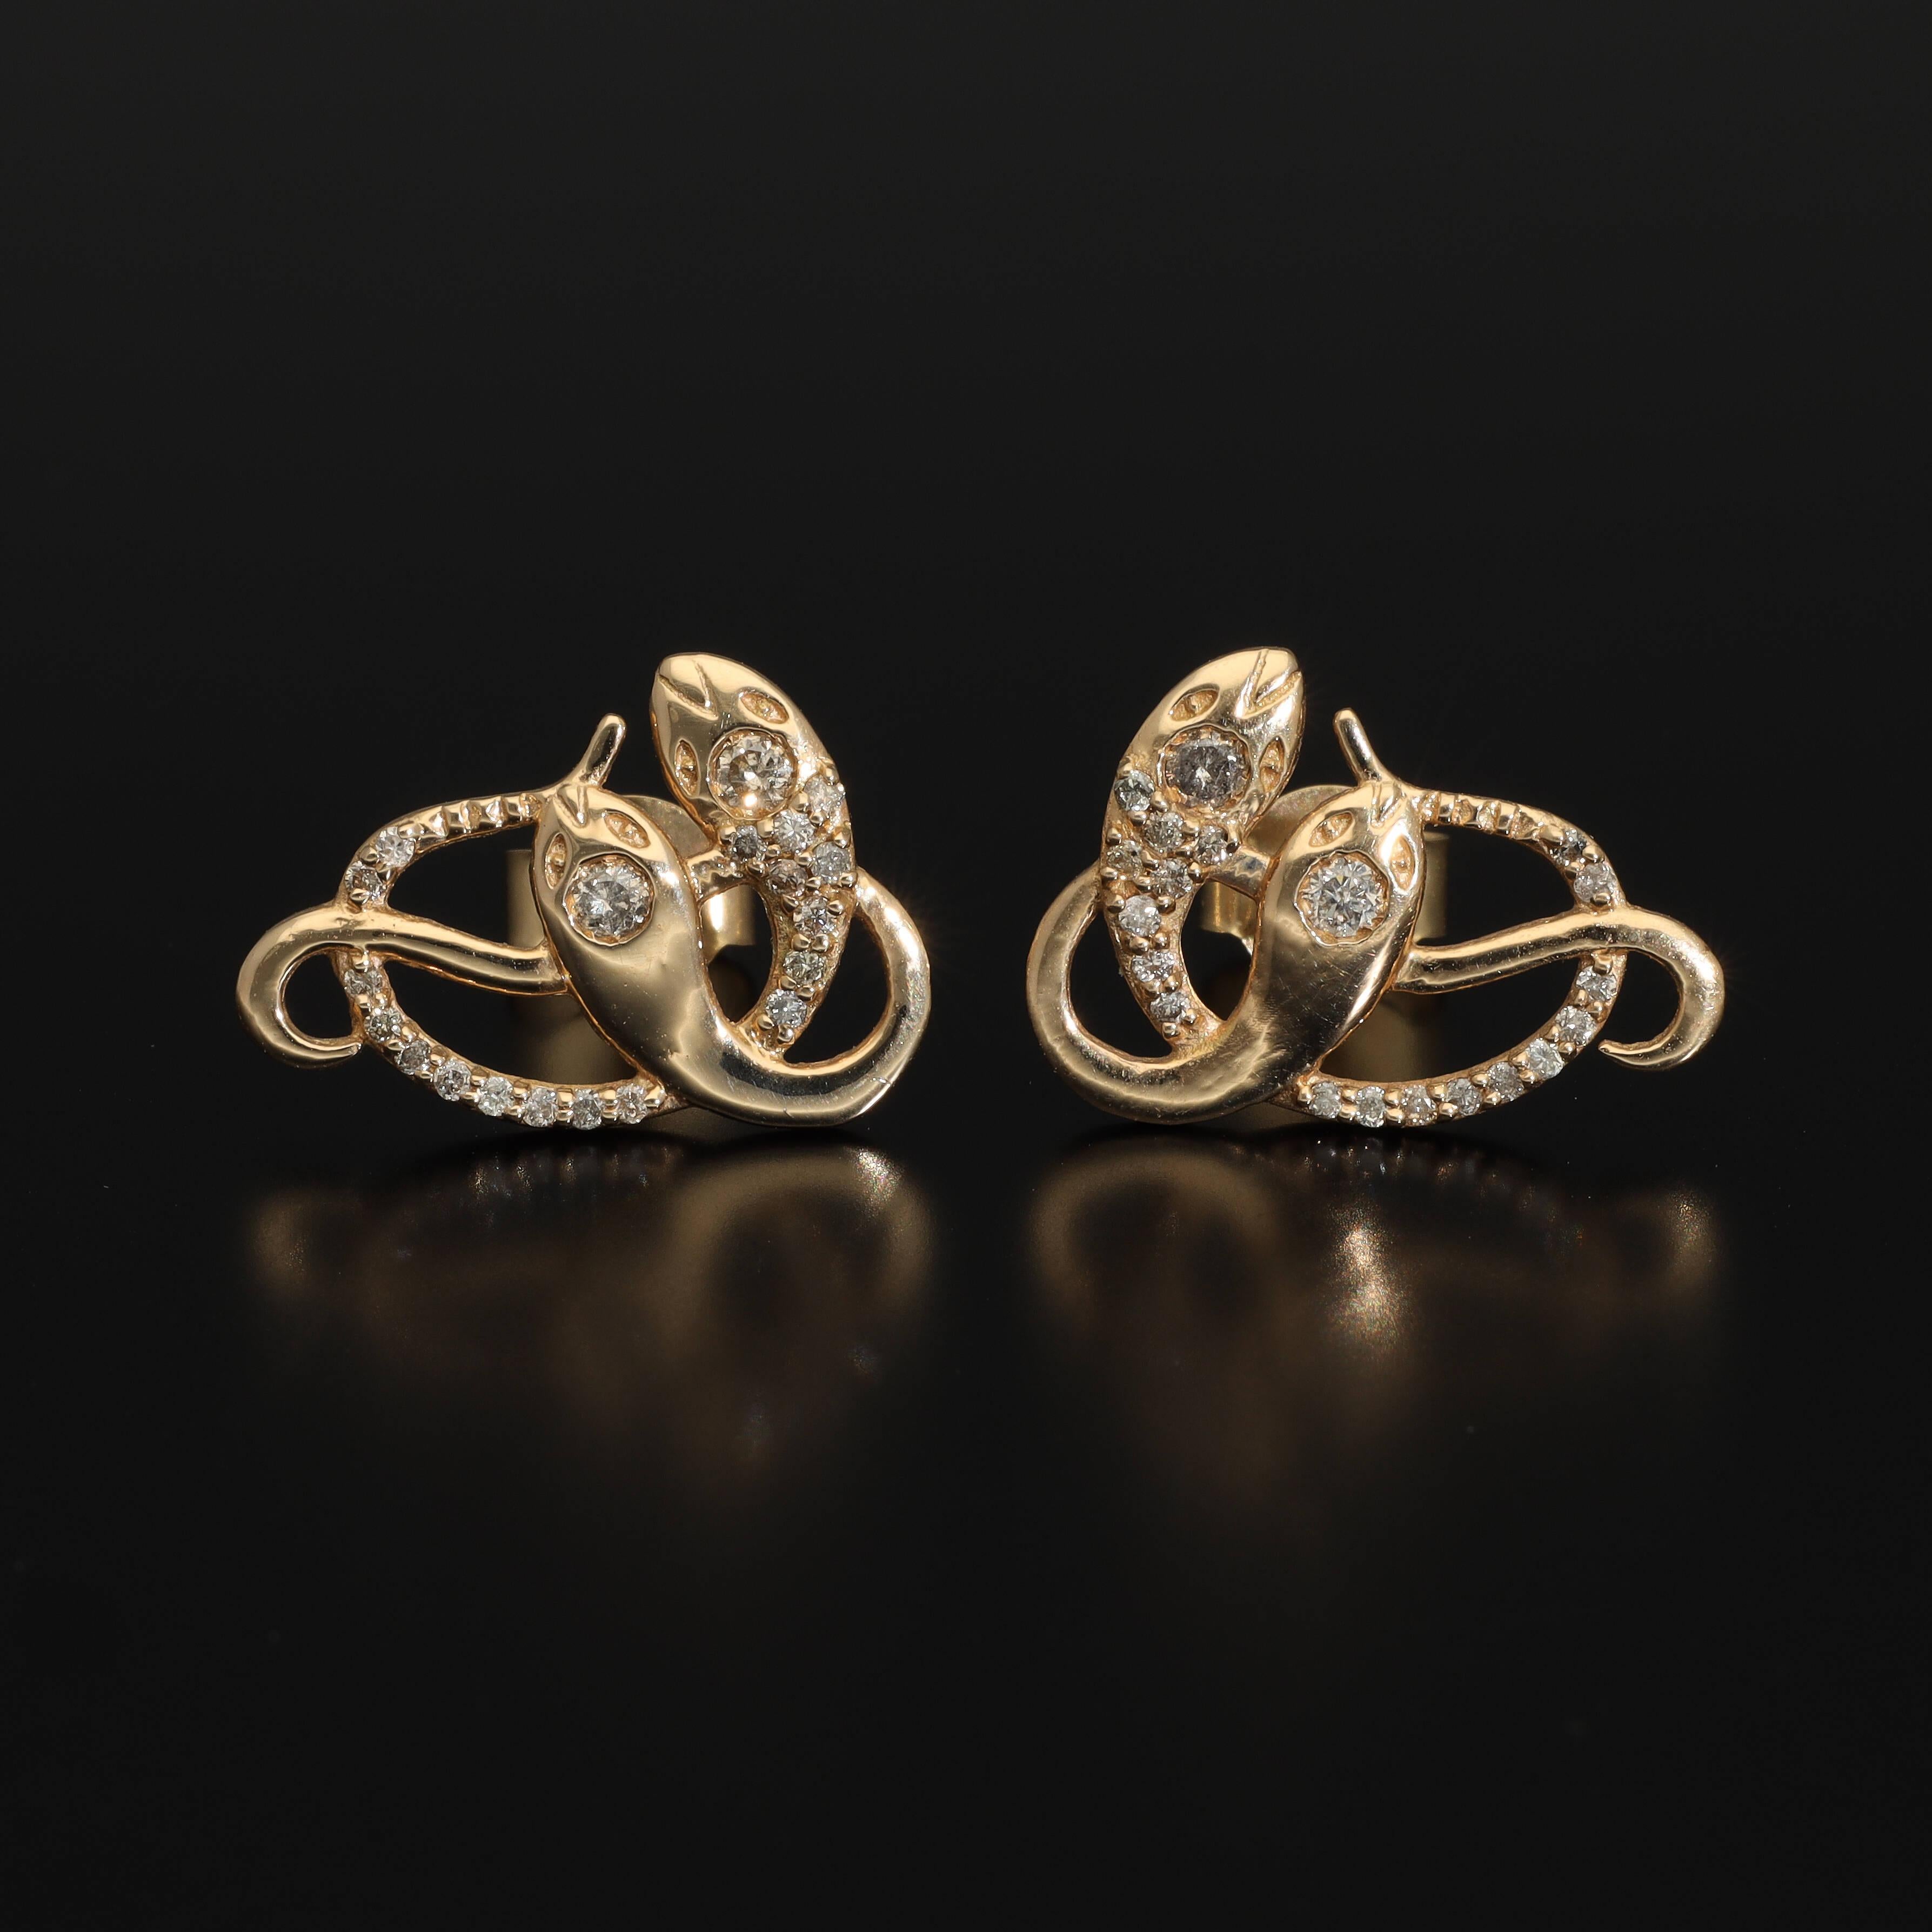 An artisan antique revival pair of solid 14ct gold snake stud earrings. These snake earrings are made of pure 14 carat gold and are set with natural diamonds. We have them both in white, rose and yellow gold, so please choose your preferred metal in